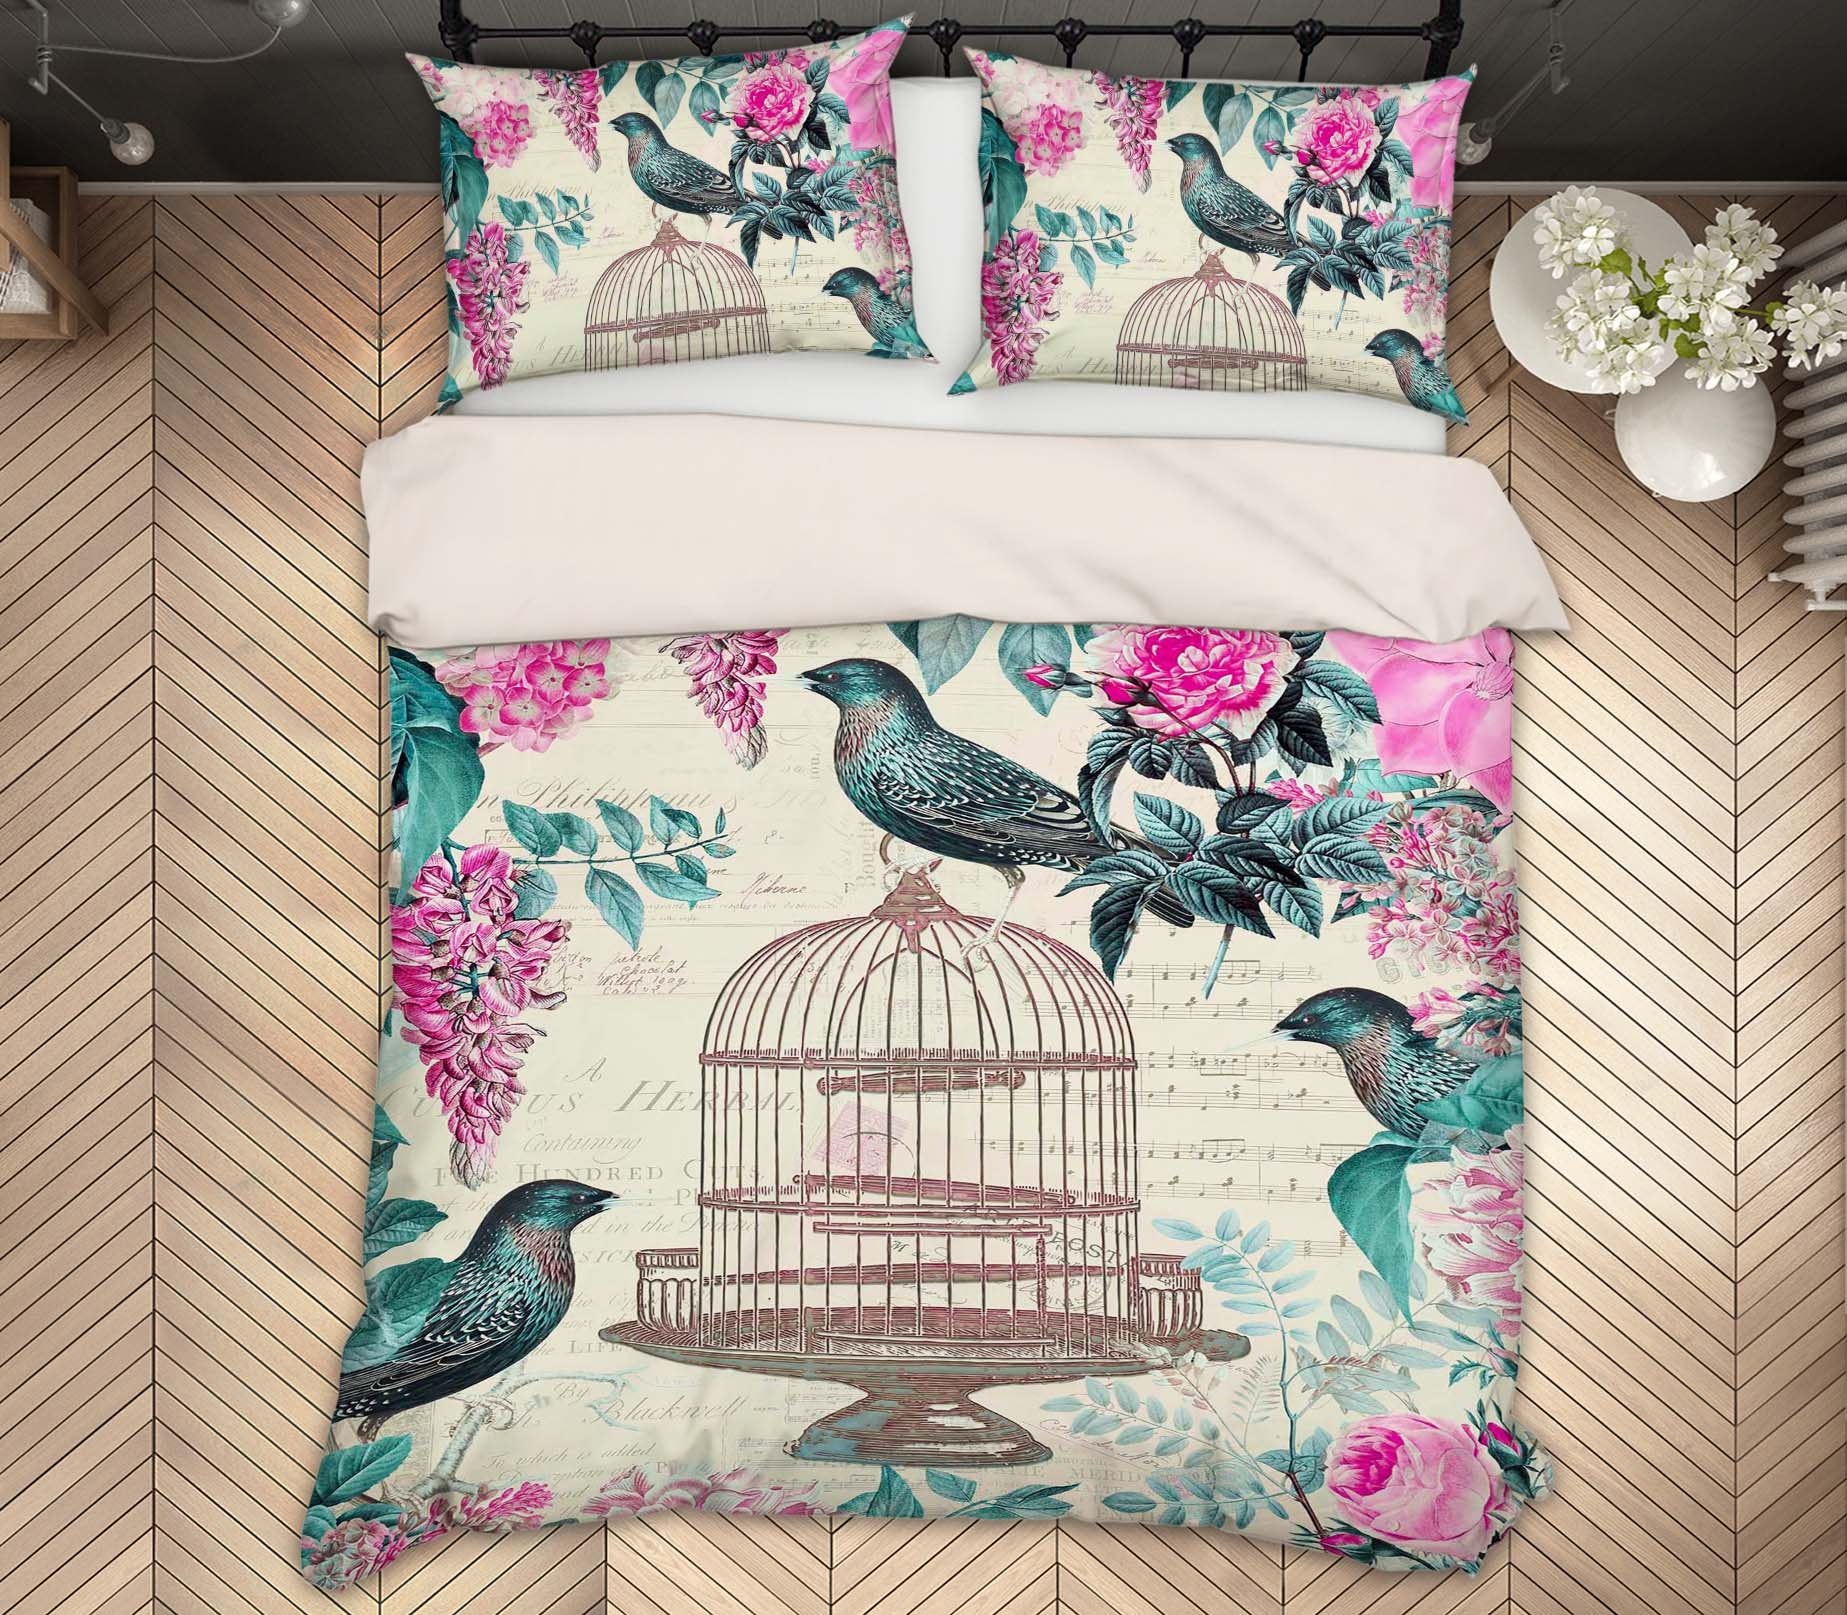 3D Bird Cage 2103 Andrea haase Bedding Bed Pillowcases Quilt Quiet Covers AJ Creativity Home 